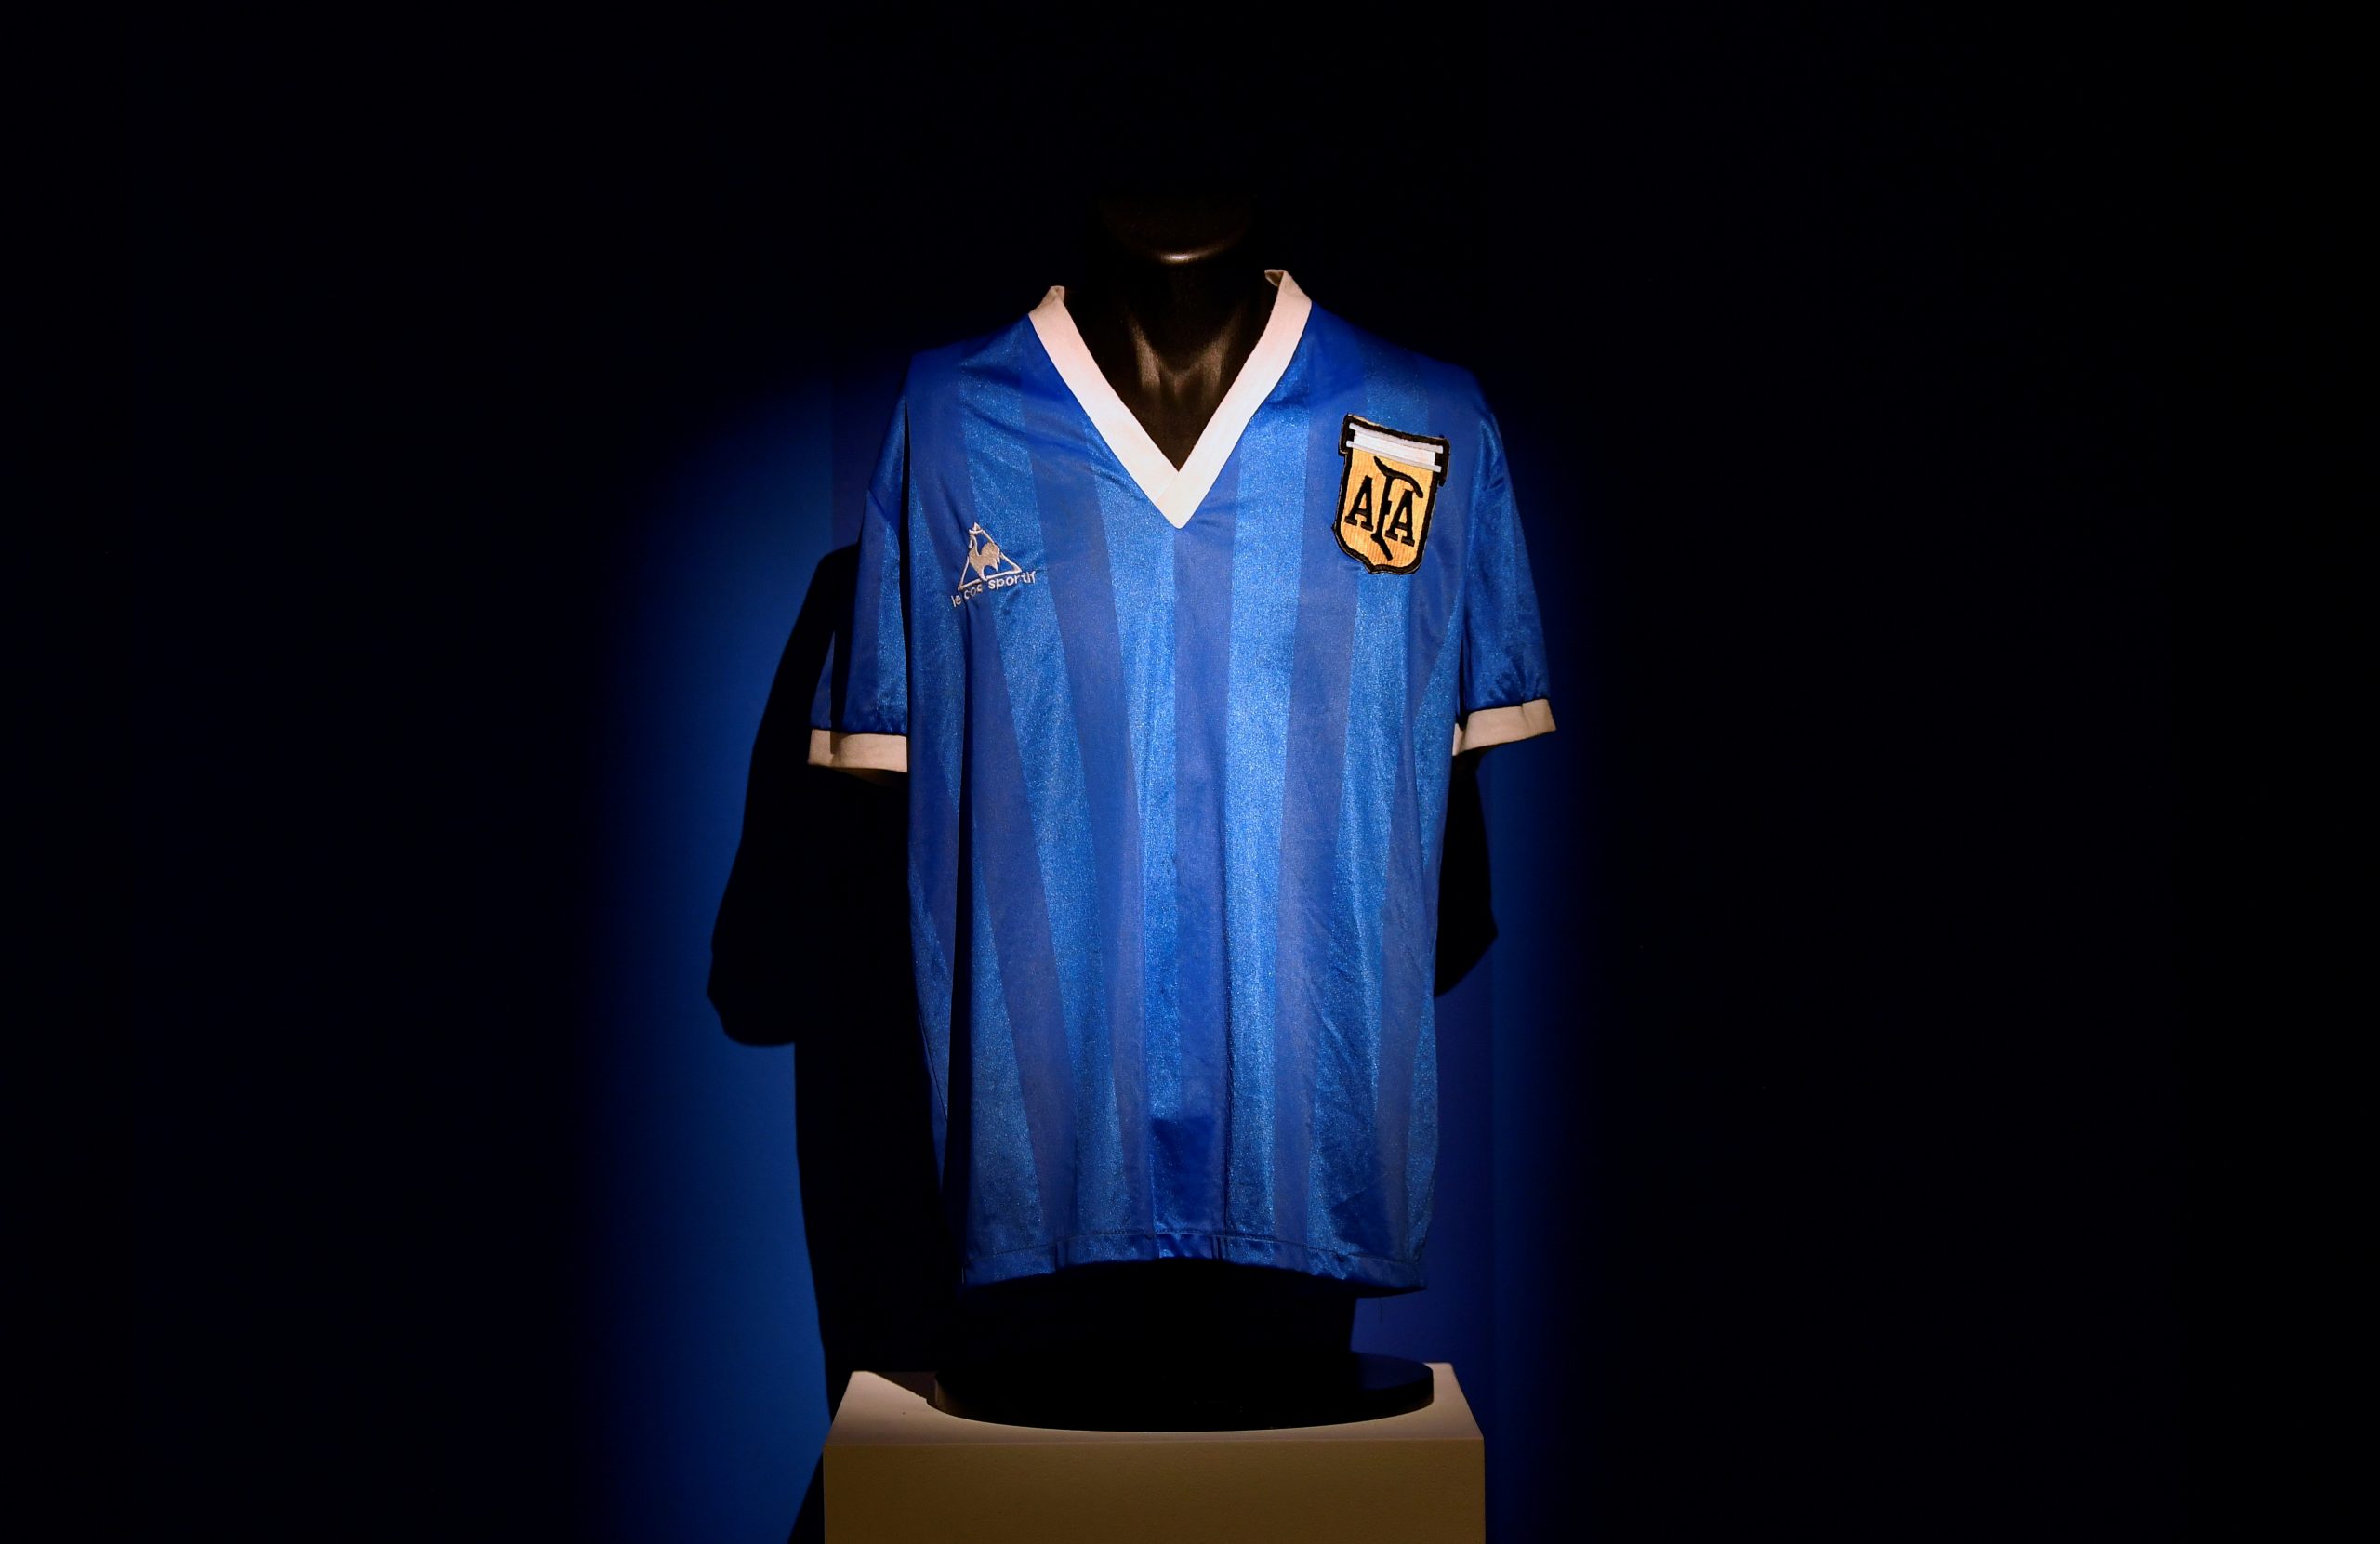 FILE PHOTO: The shirt worn by Argentinian soccer player Diego Maradona in the 1986 World Cup quarter final against England is displayed ahead of it being auctioned by Sotheby's, in London,